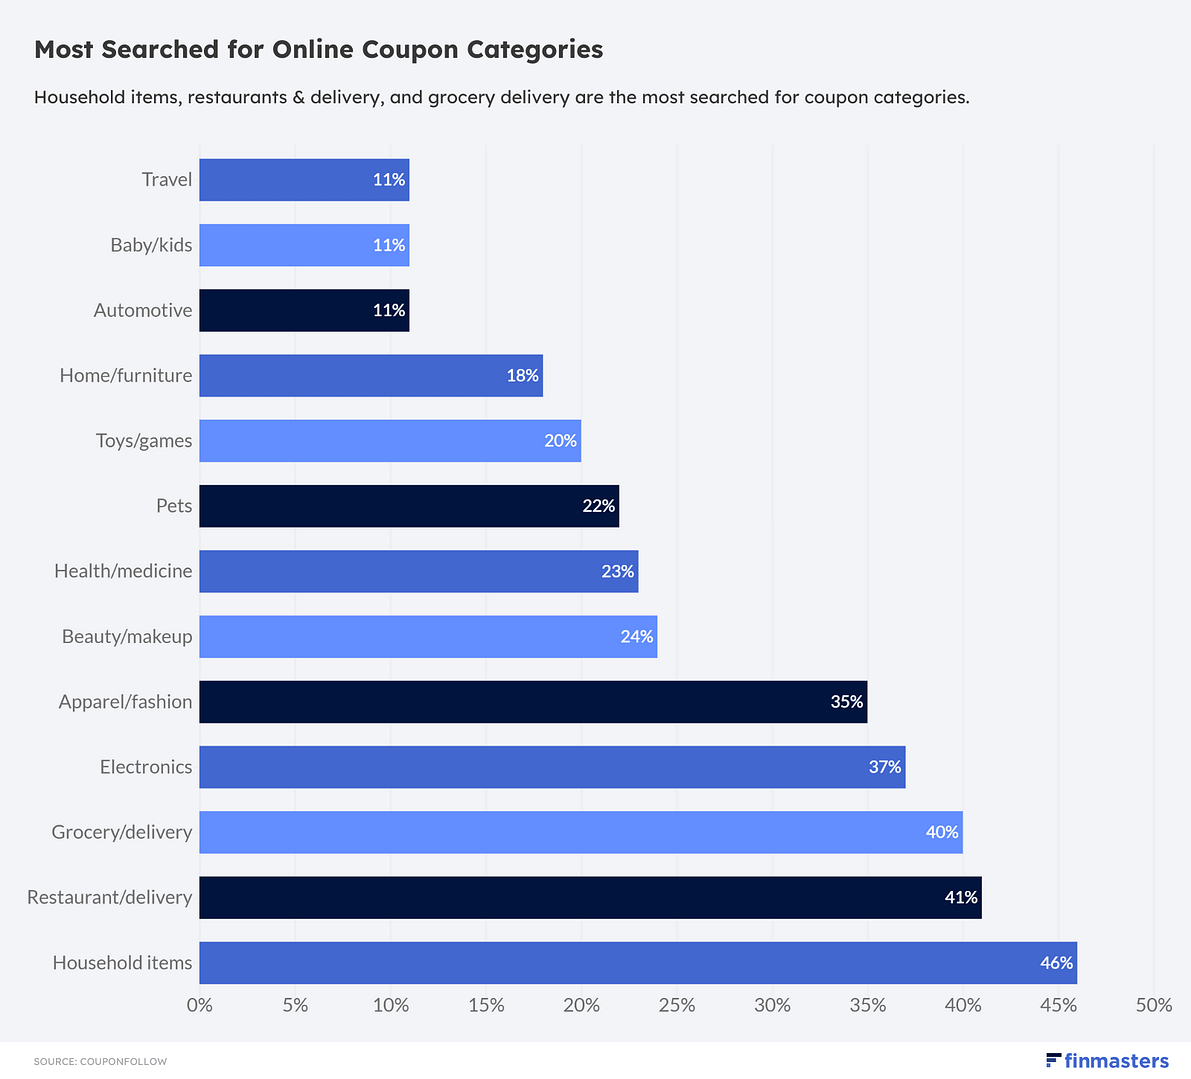 Most Searched for Online coupon categories